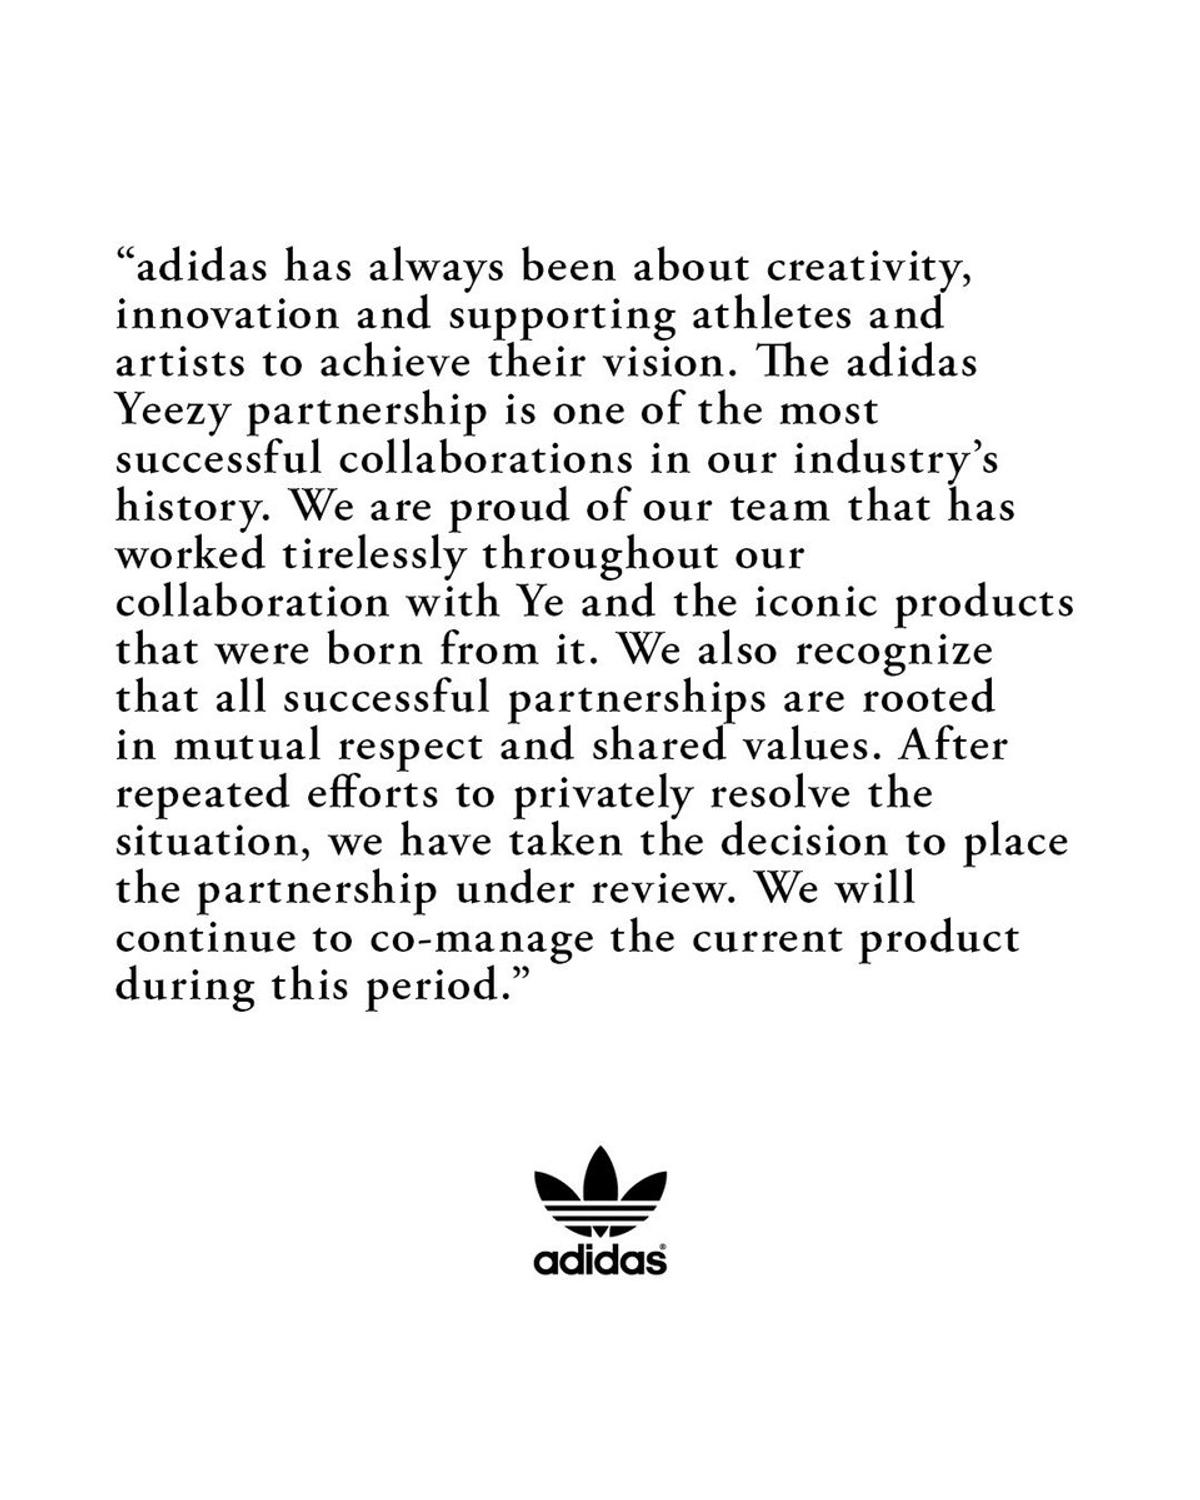 Official statement from adidas in regard to their partnership with Ye and his Yeezy brand 